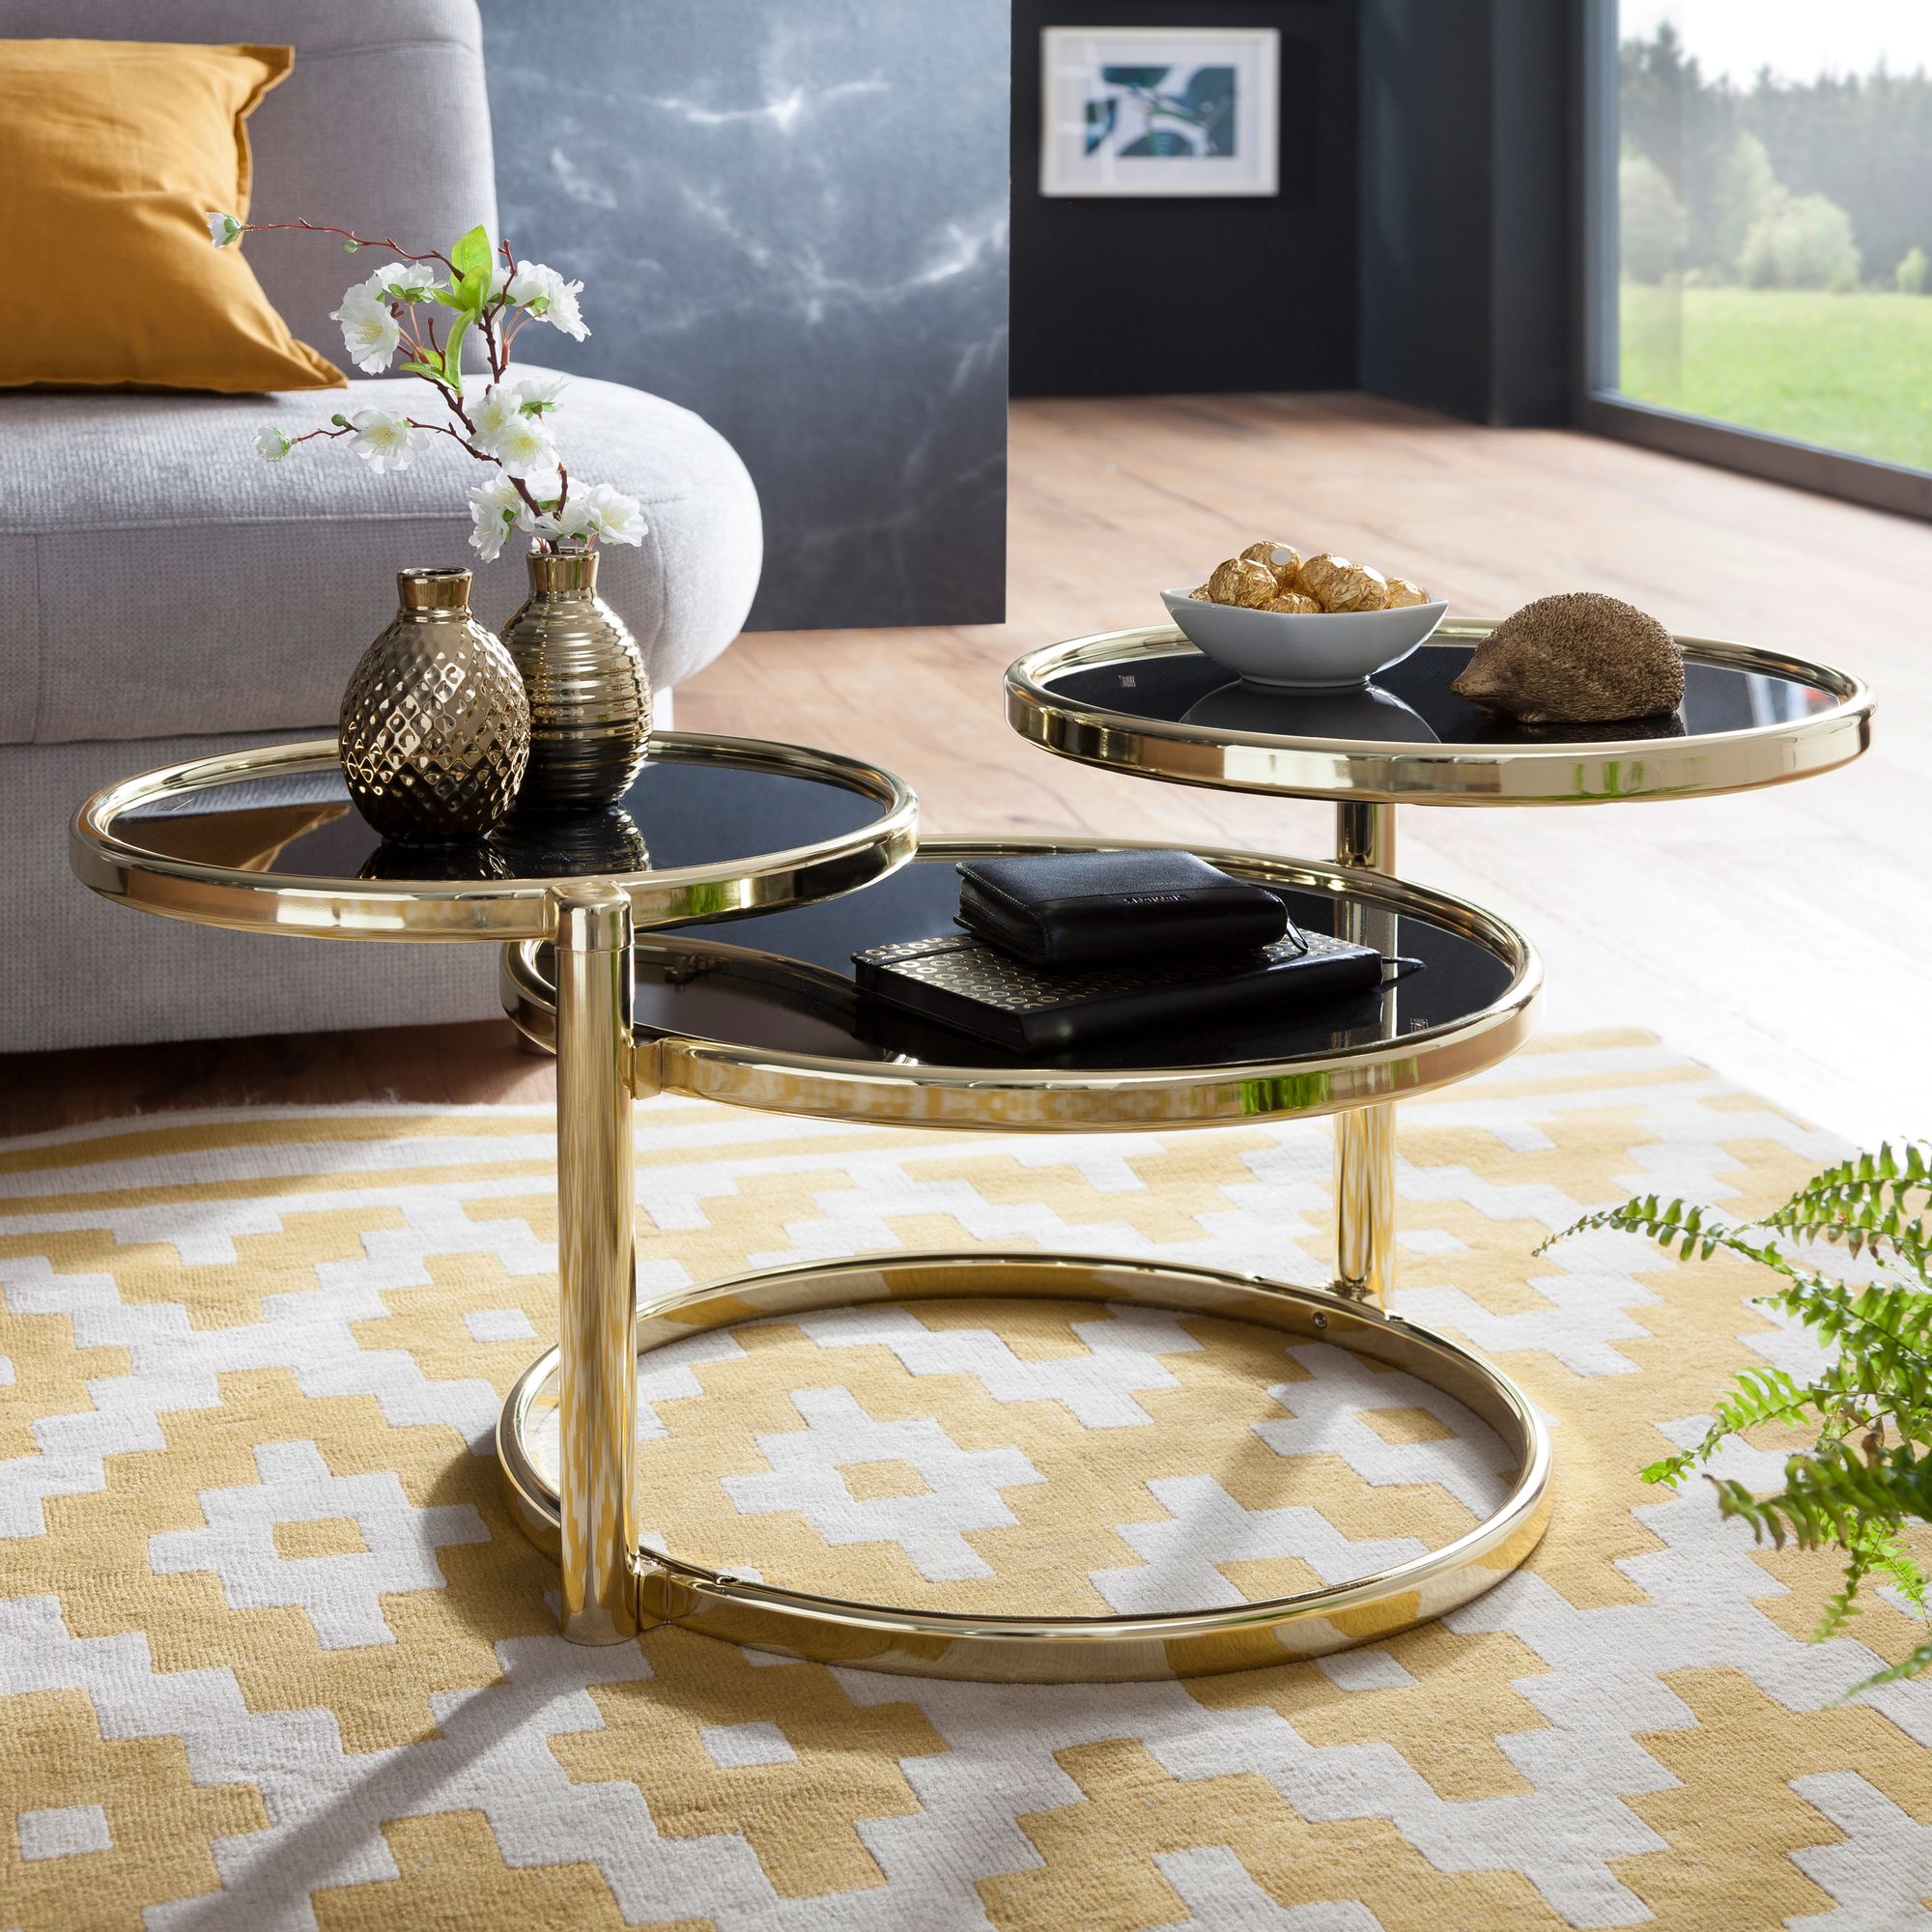 Nancy's Beaufort Coffee Table - Three-layer - Side table - Round Coffee table - Metal - Glass - Black - Gold/Copper